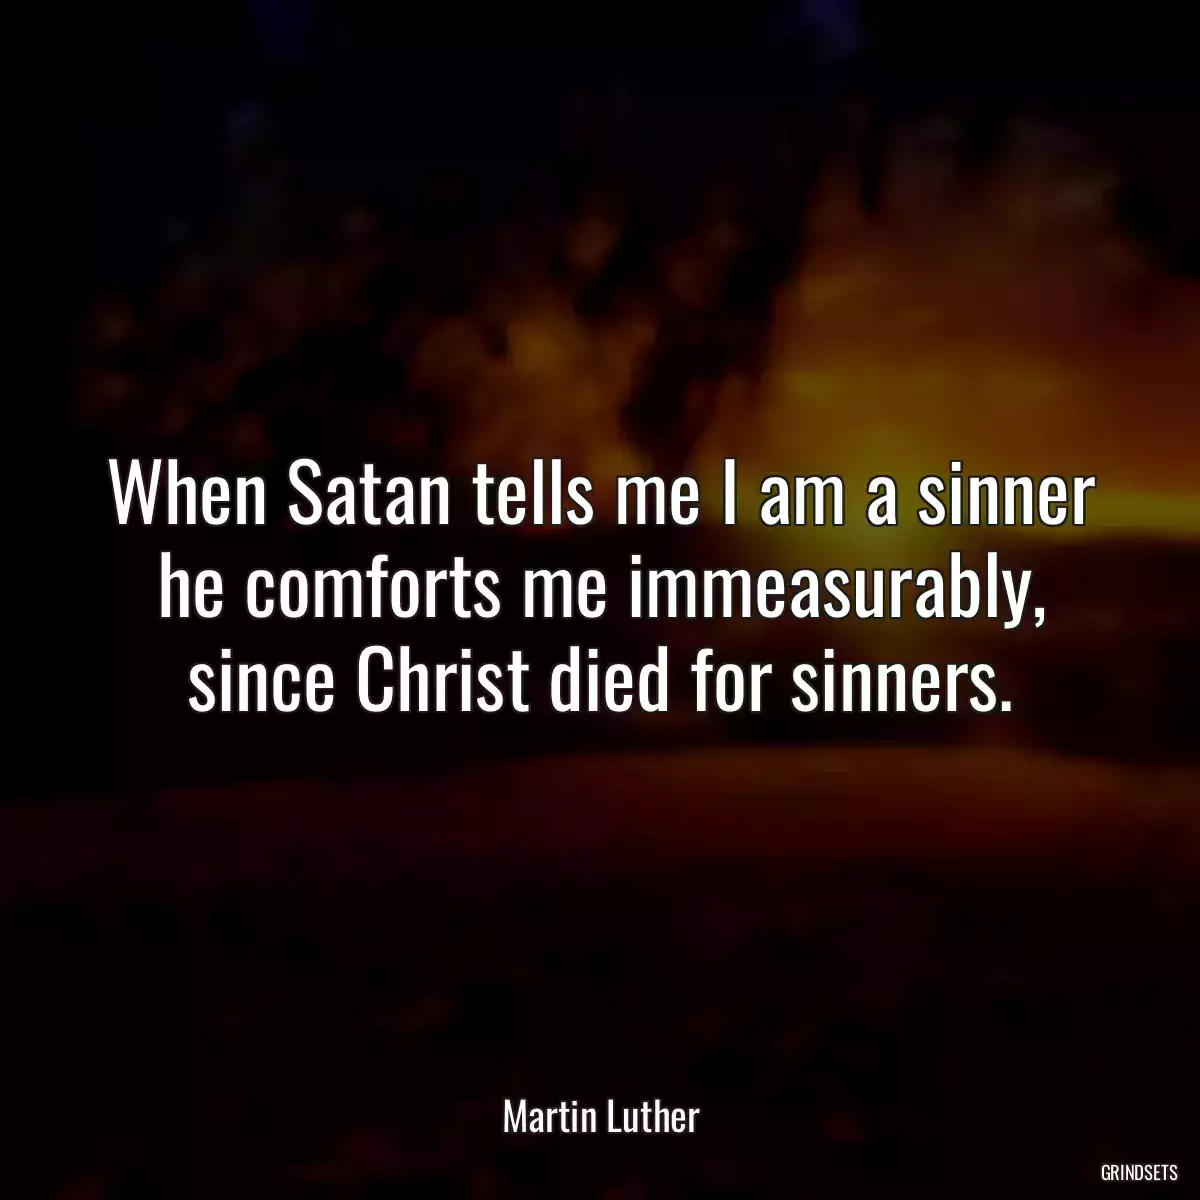 When Satan tells me I am a sinner he comforts me immeasurably, since Christ died for sinners.